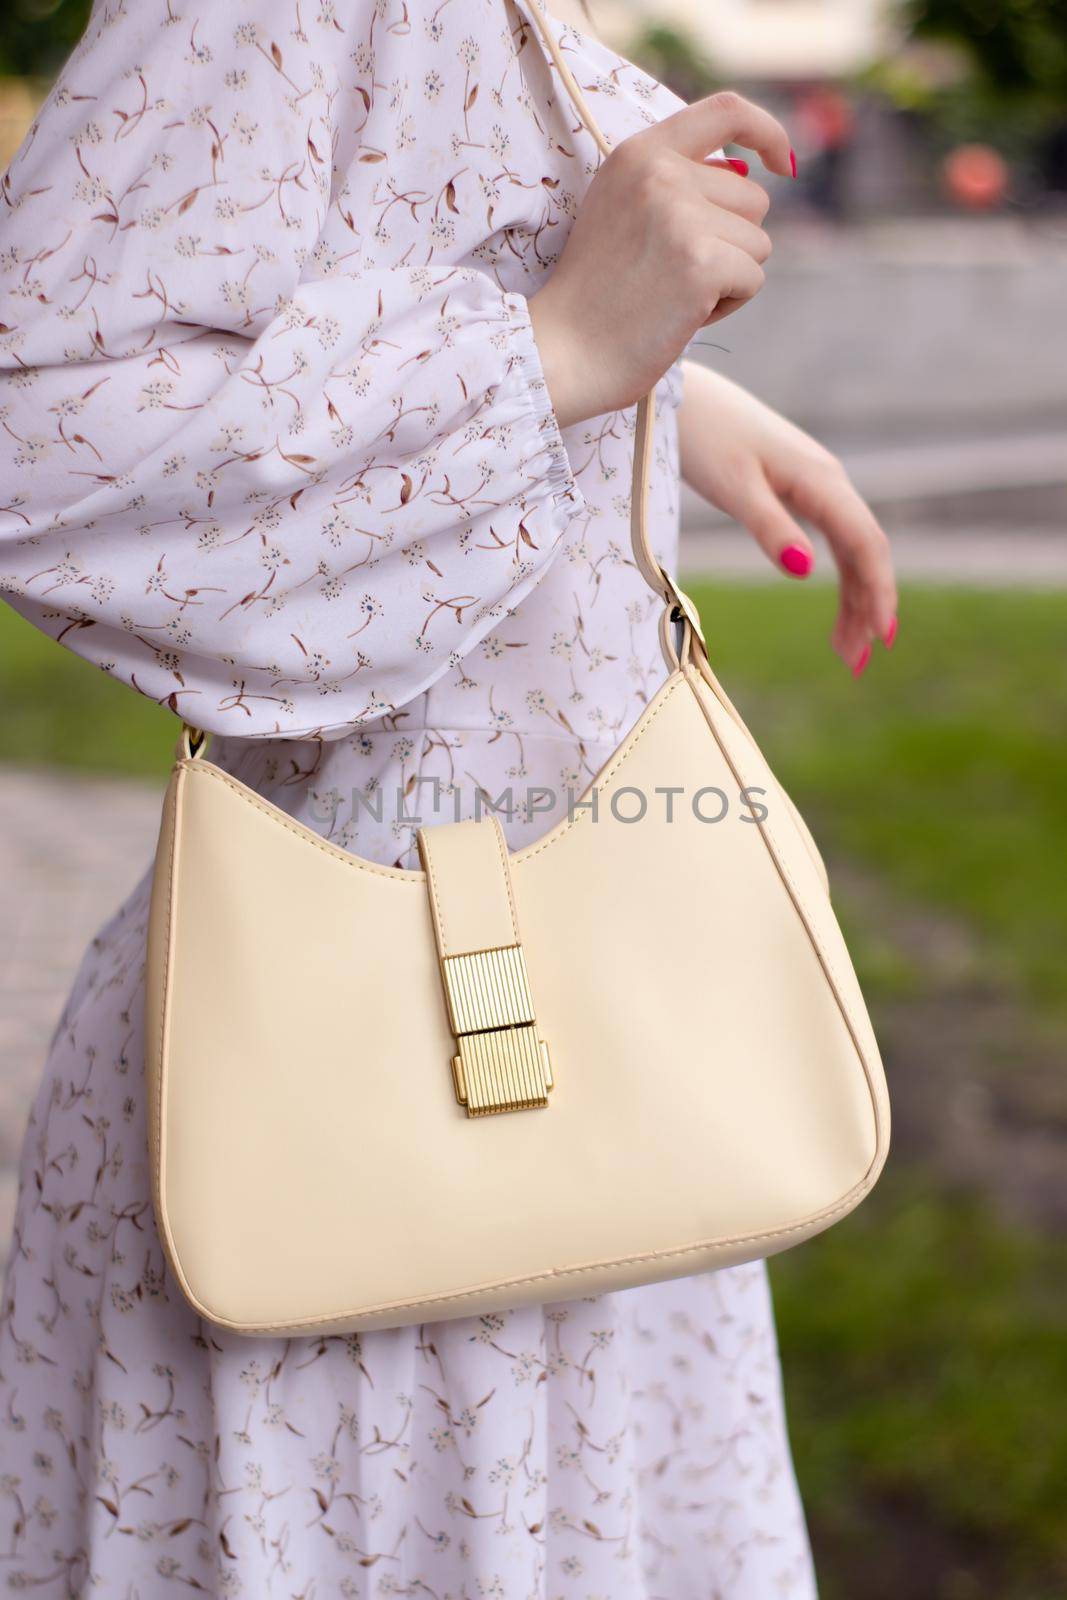 close up of woman in white dress holding fashionable beige purse outside. Product photography. stylish handbag for women by oliavesna